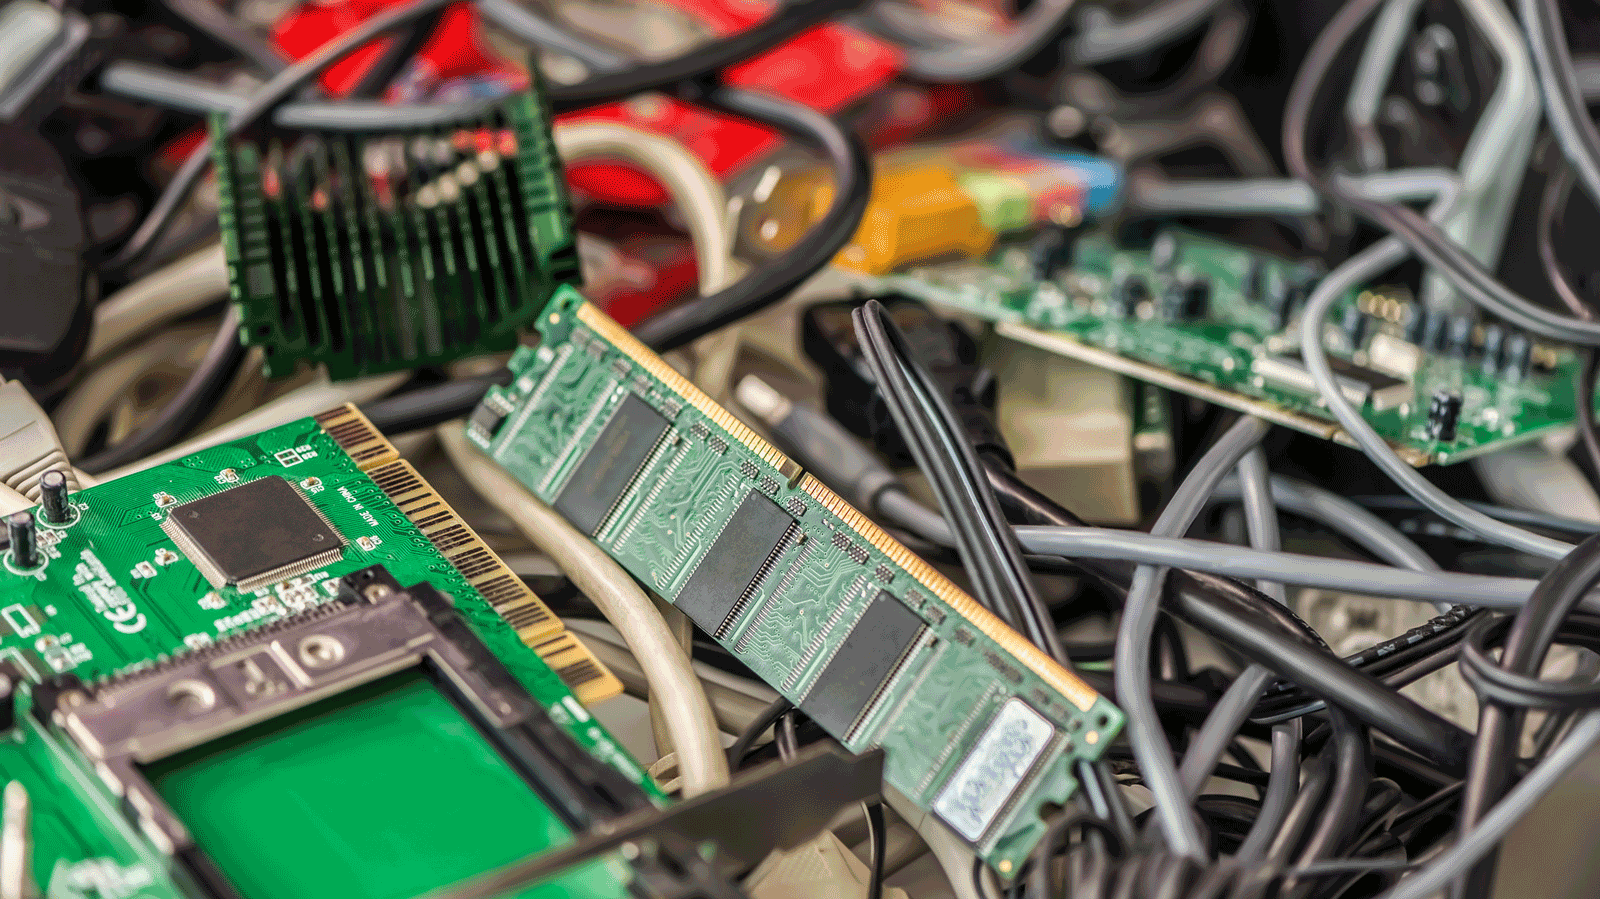 Global e-waste quantities rising five times faster than recycling efforts